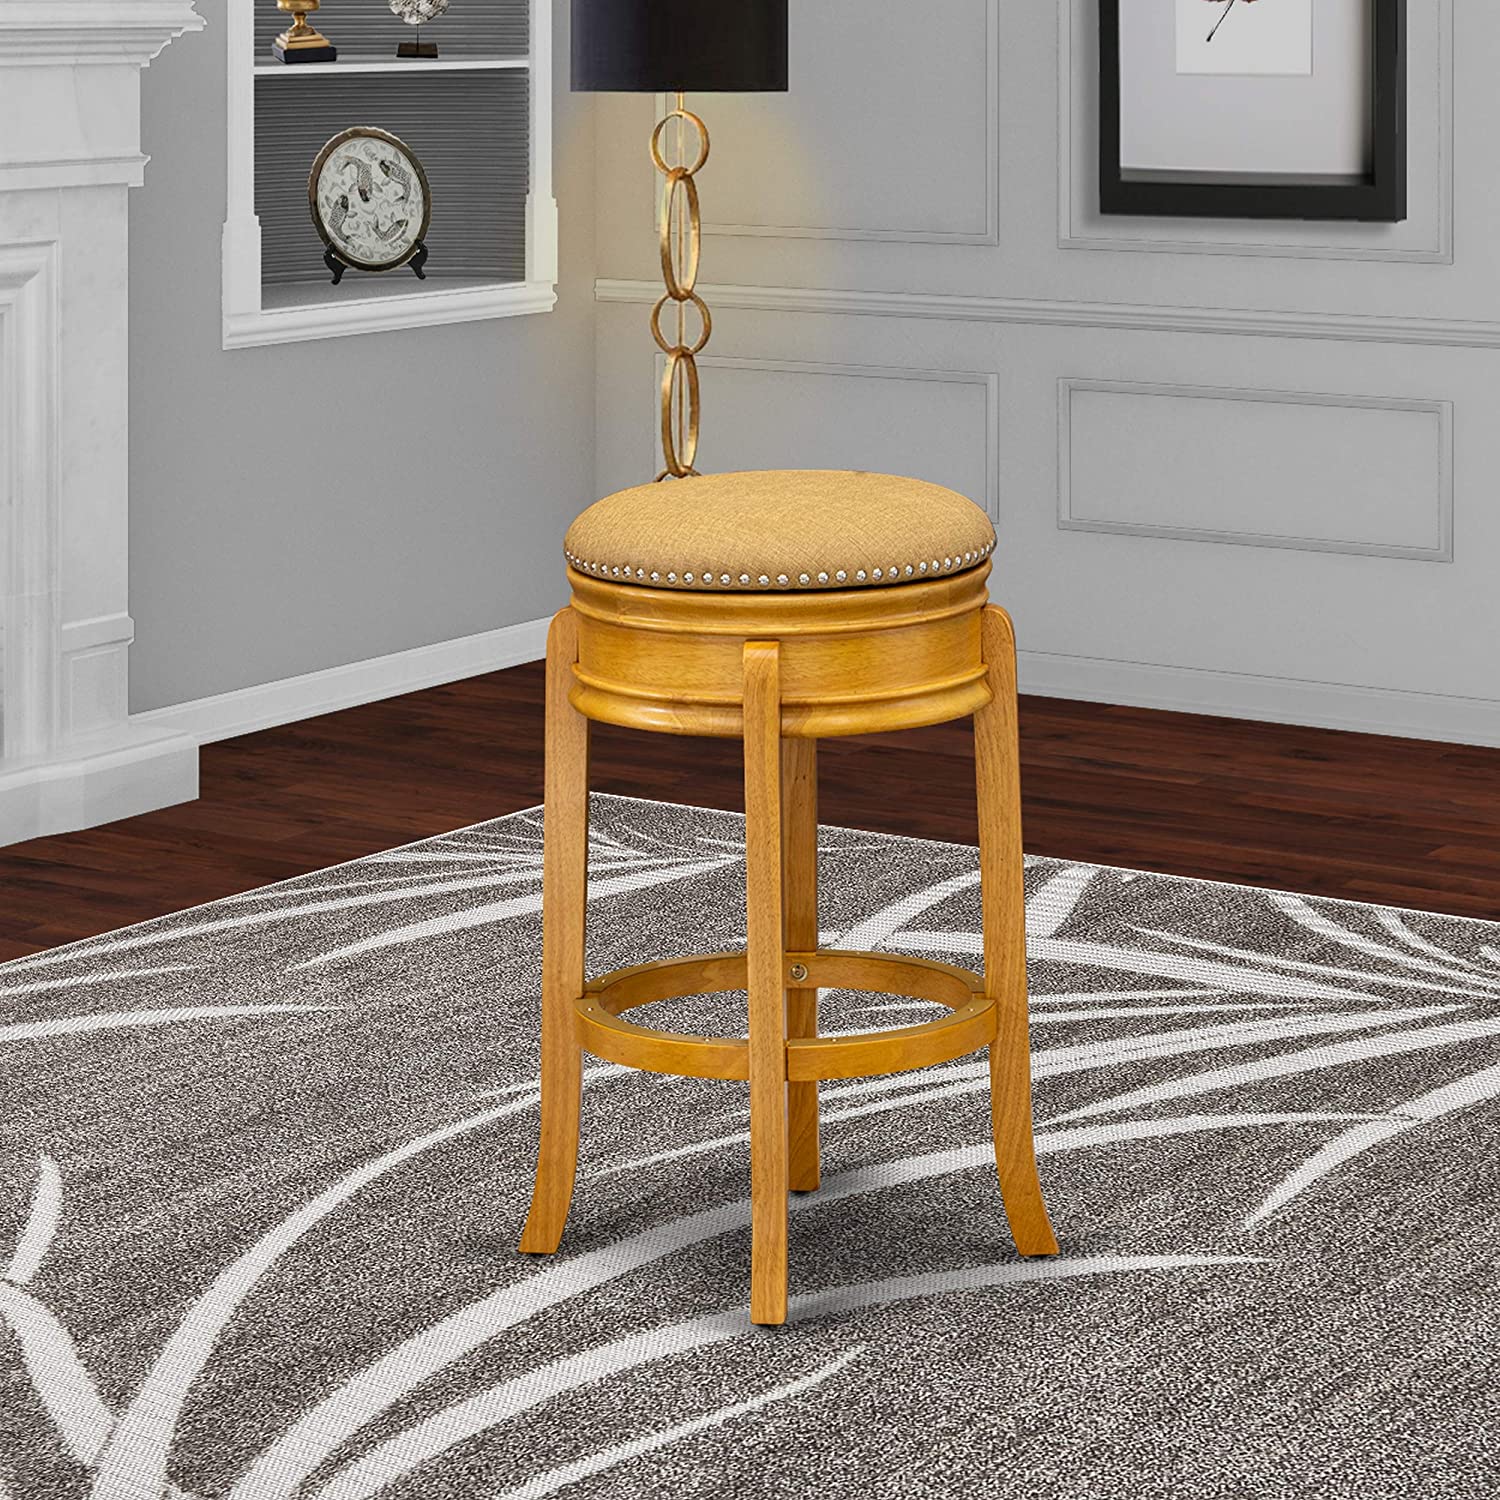 East West Furniture AMS030-416 Counter Height Bar Stool- Counter Height Bar Stool with Round Shape - Vegas Gold PU Leather Seat and 4 Solid Wood Curved Legs - Upholstered Bar Stool Oak Finish, 30